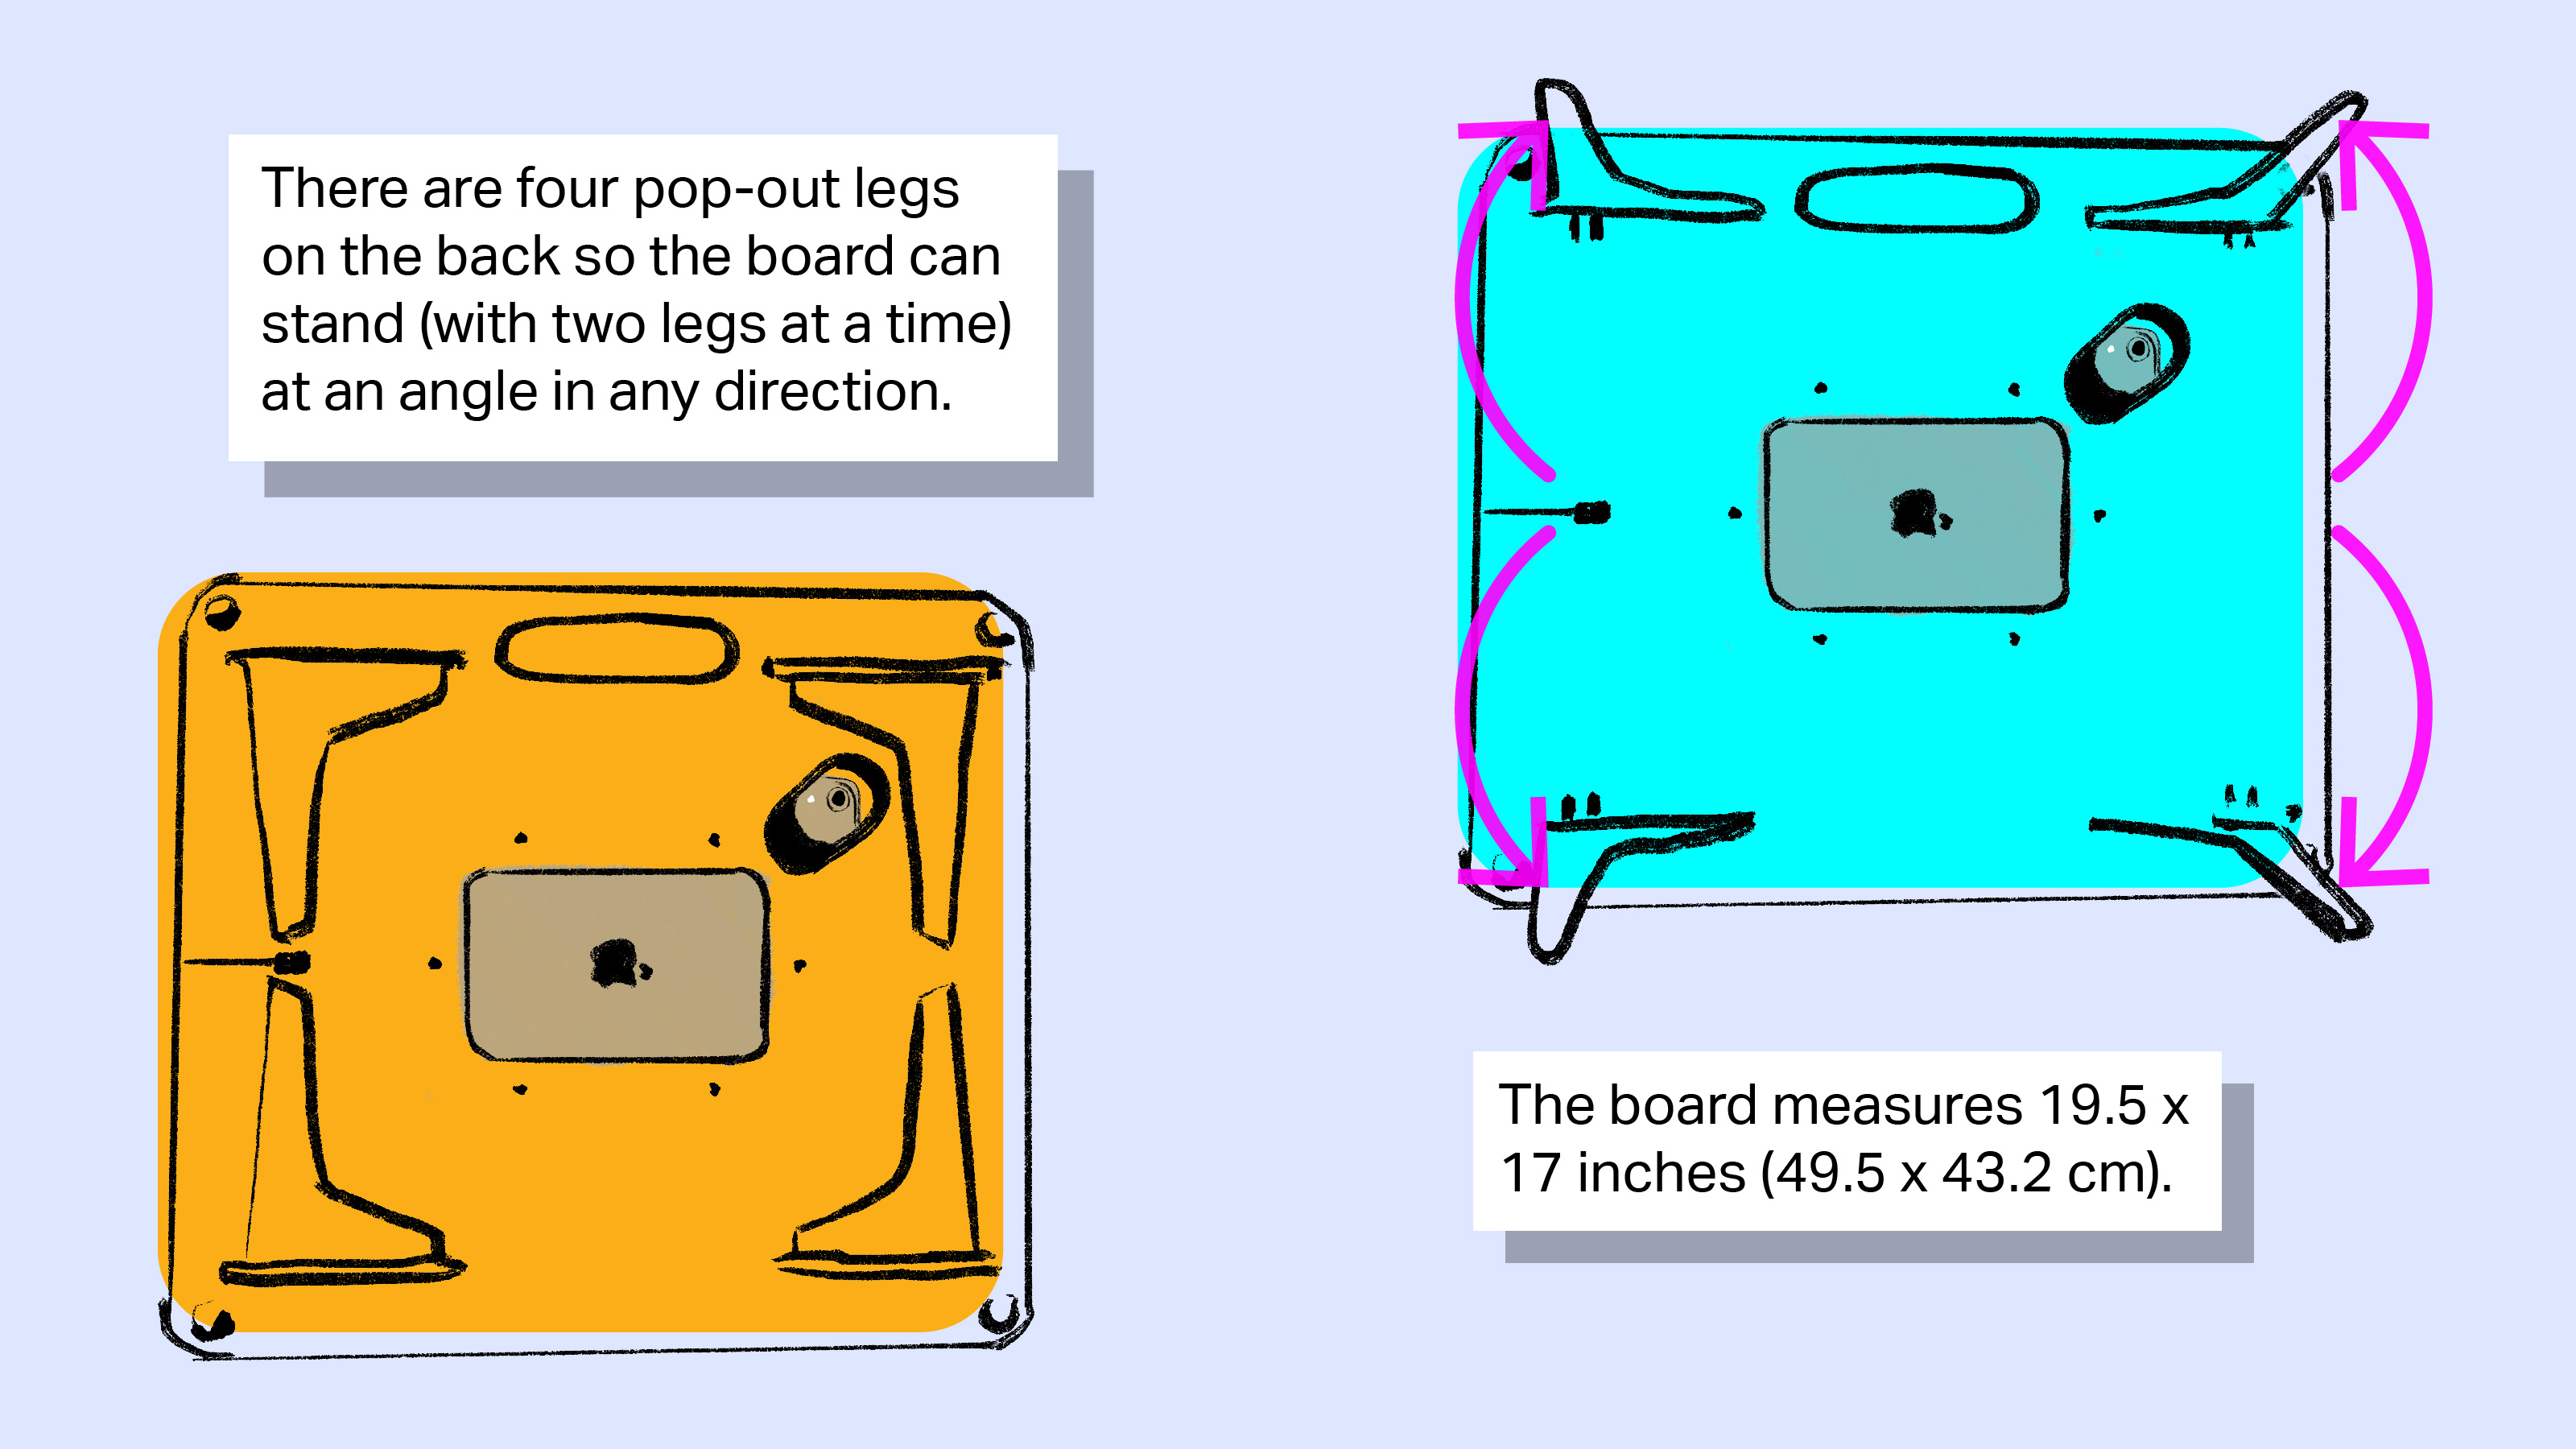 [text] There are four pop-out legs on the back so the board can stand (with two legs at a time) at an angle in any direction. The board measures 19.5 x 17 inches (49.5 x 43.2 cm). [image: two back views of the Sketchboard Pro, one with legs collapsed and one with legs out.]